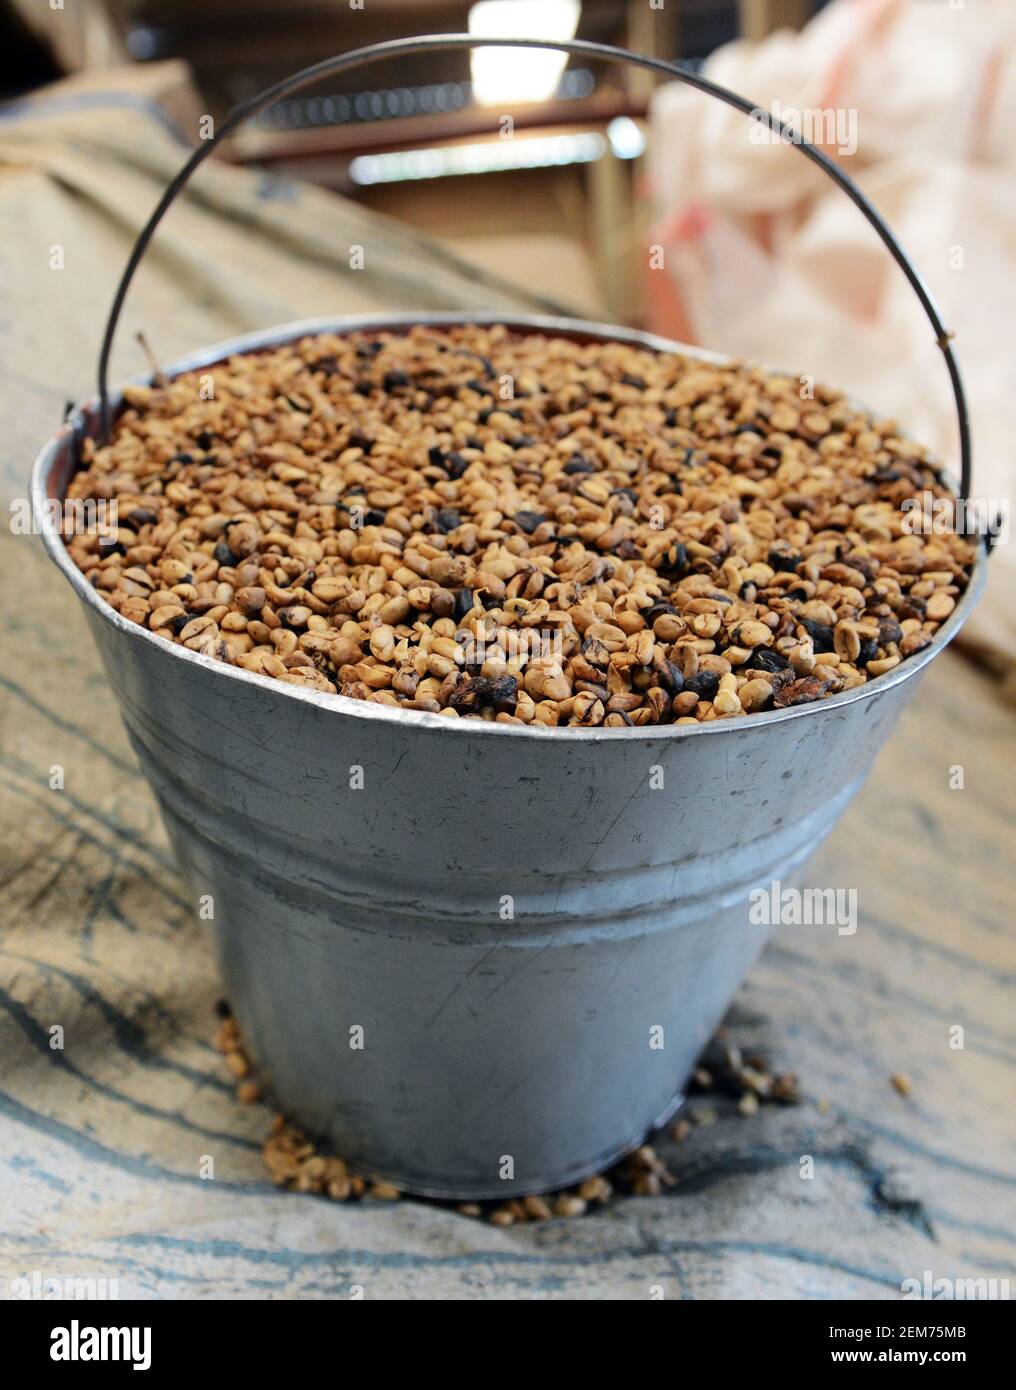 A bucket unsorted coffee beans. Stock Photo